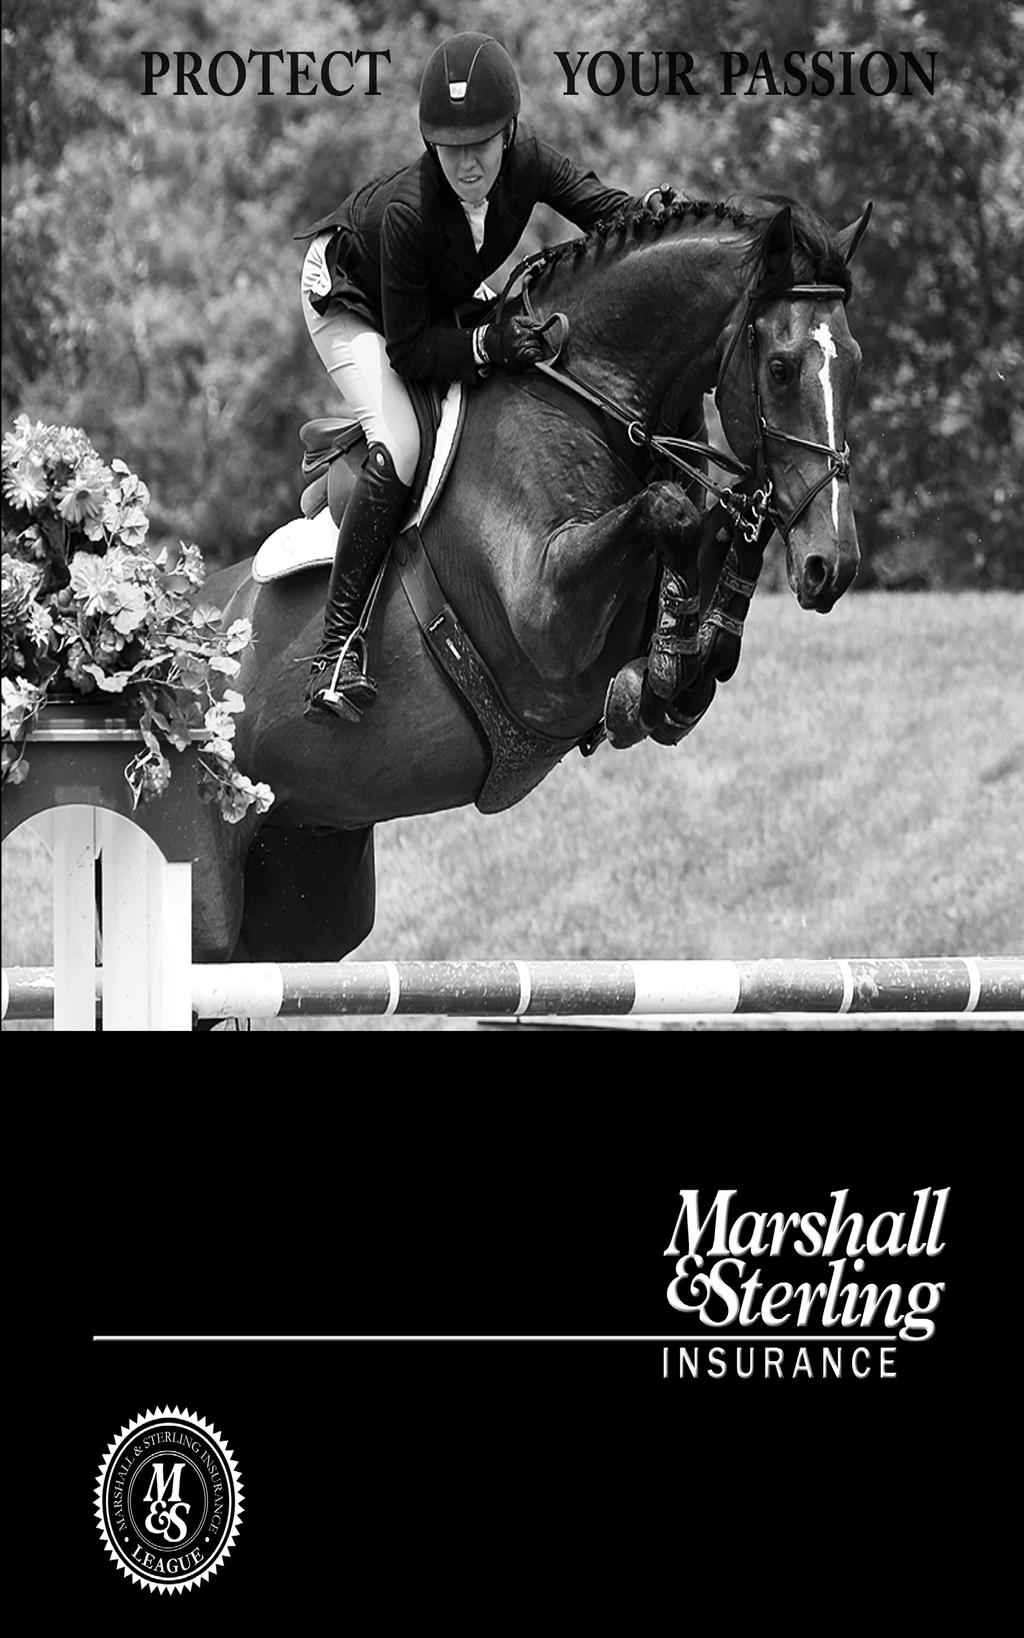 The Marshall & Sterling Insurance League National Finals, and the Midwest Regional Marshall & Sterling Insurance League Finals! WHAT HORSE SHOWS COUNT? WHAT DIVISIONS COUNT?